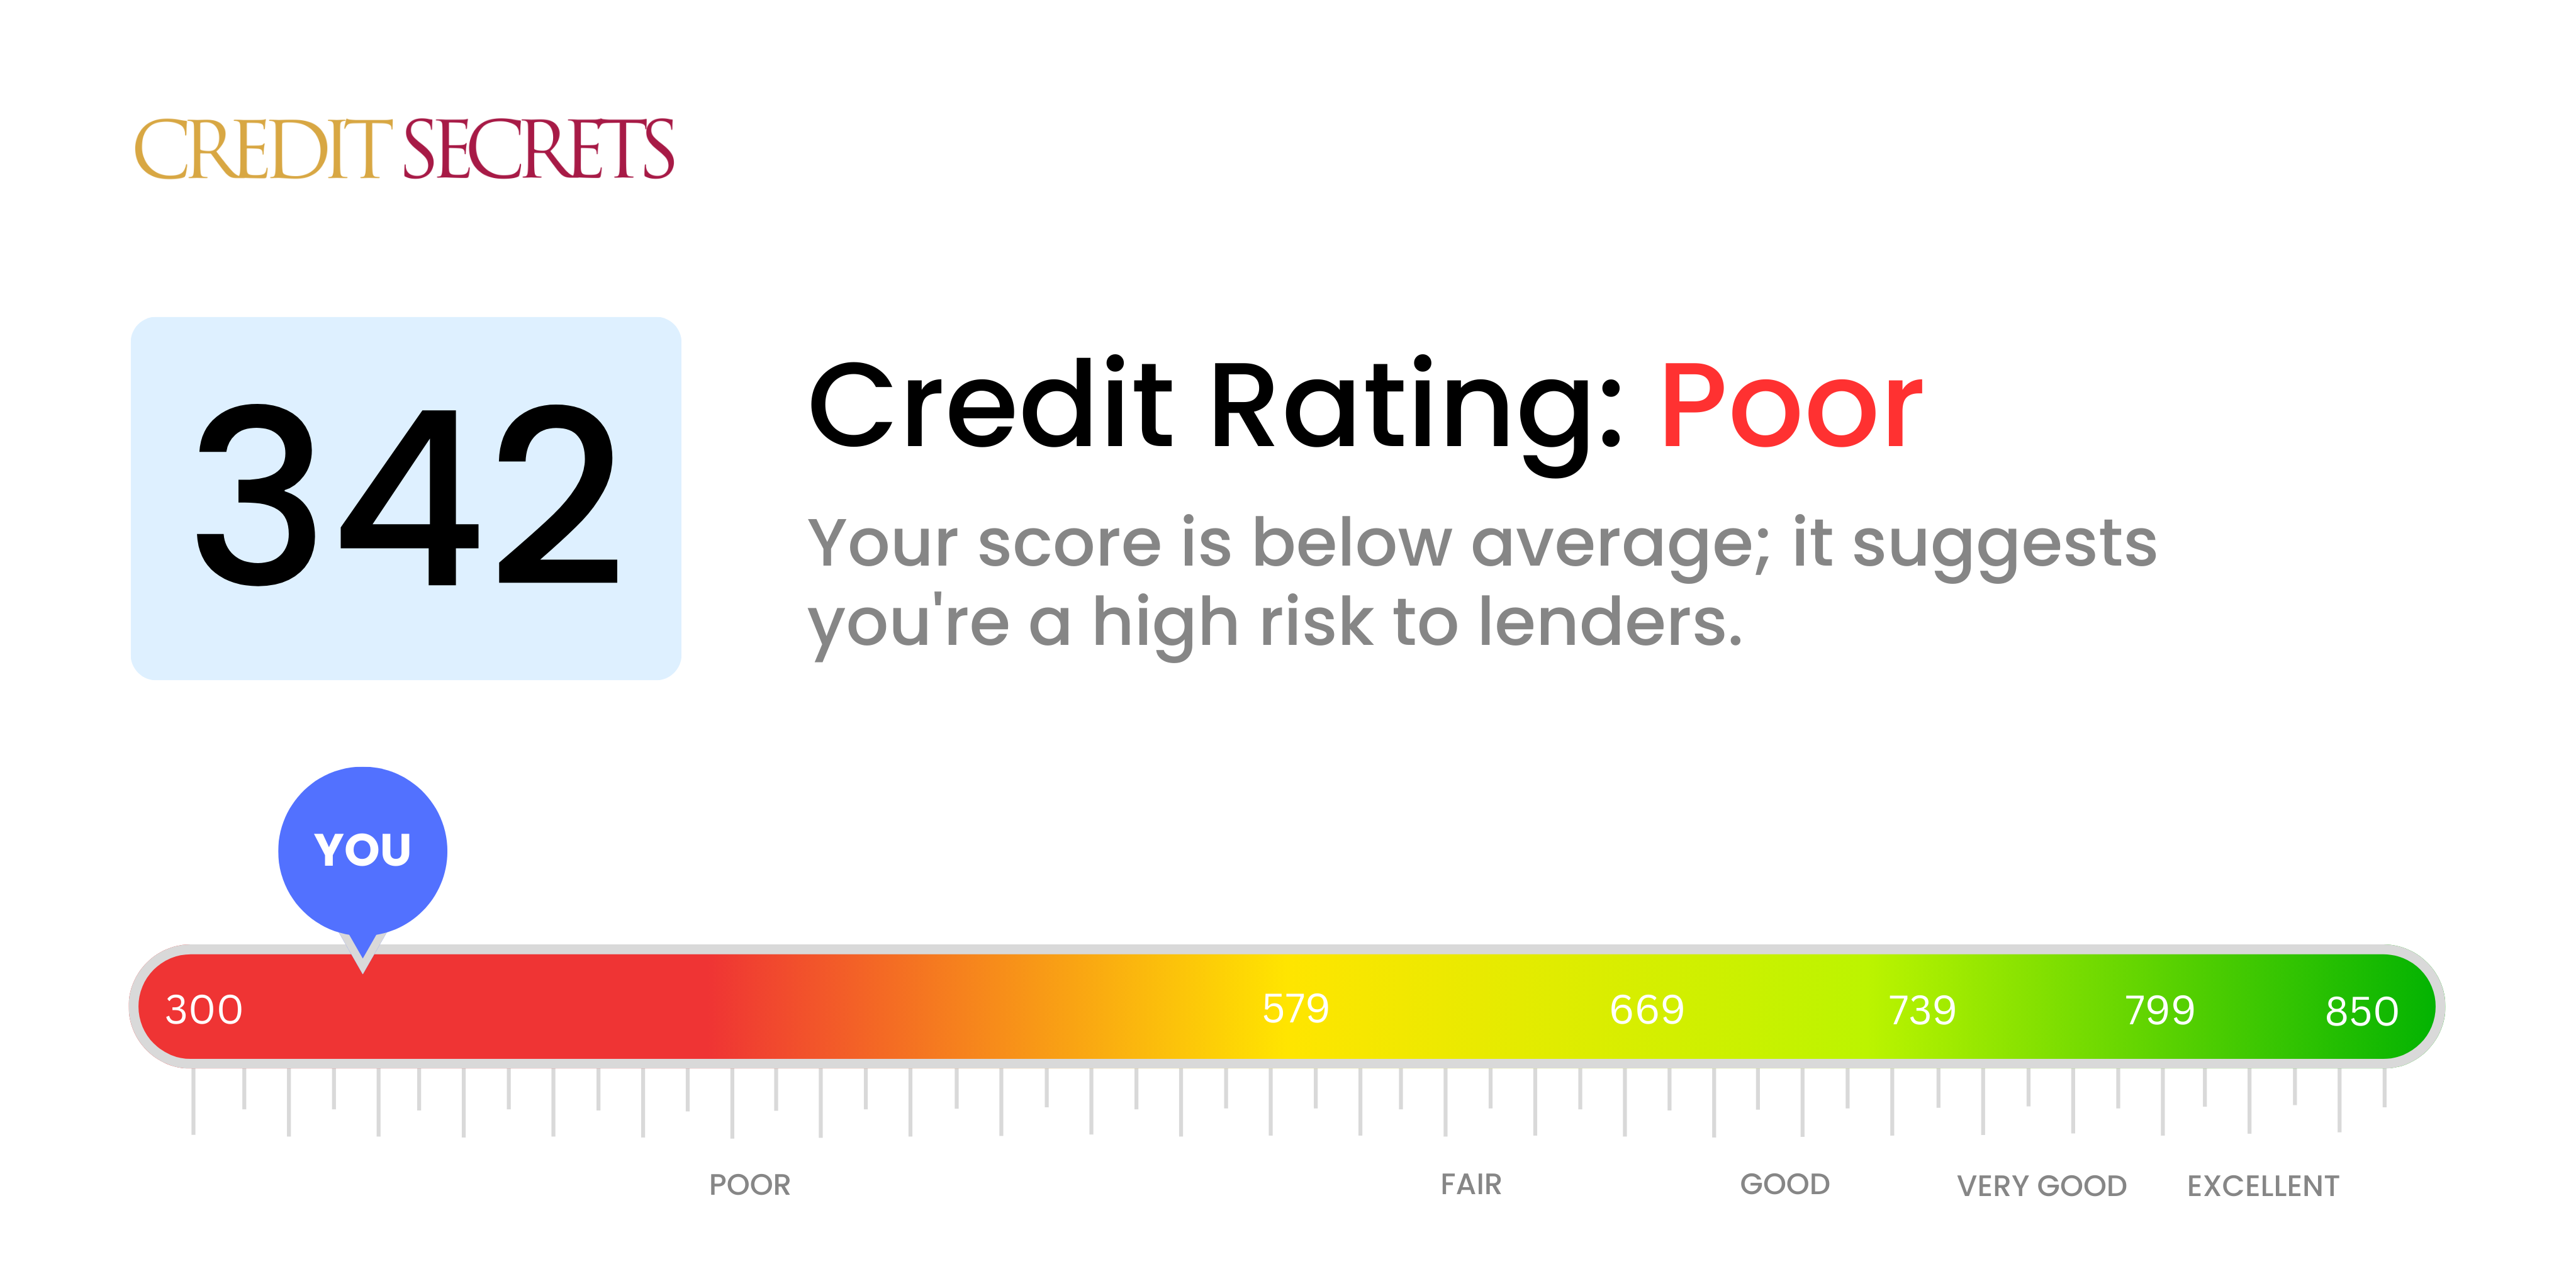 Is 342 a good credit score?